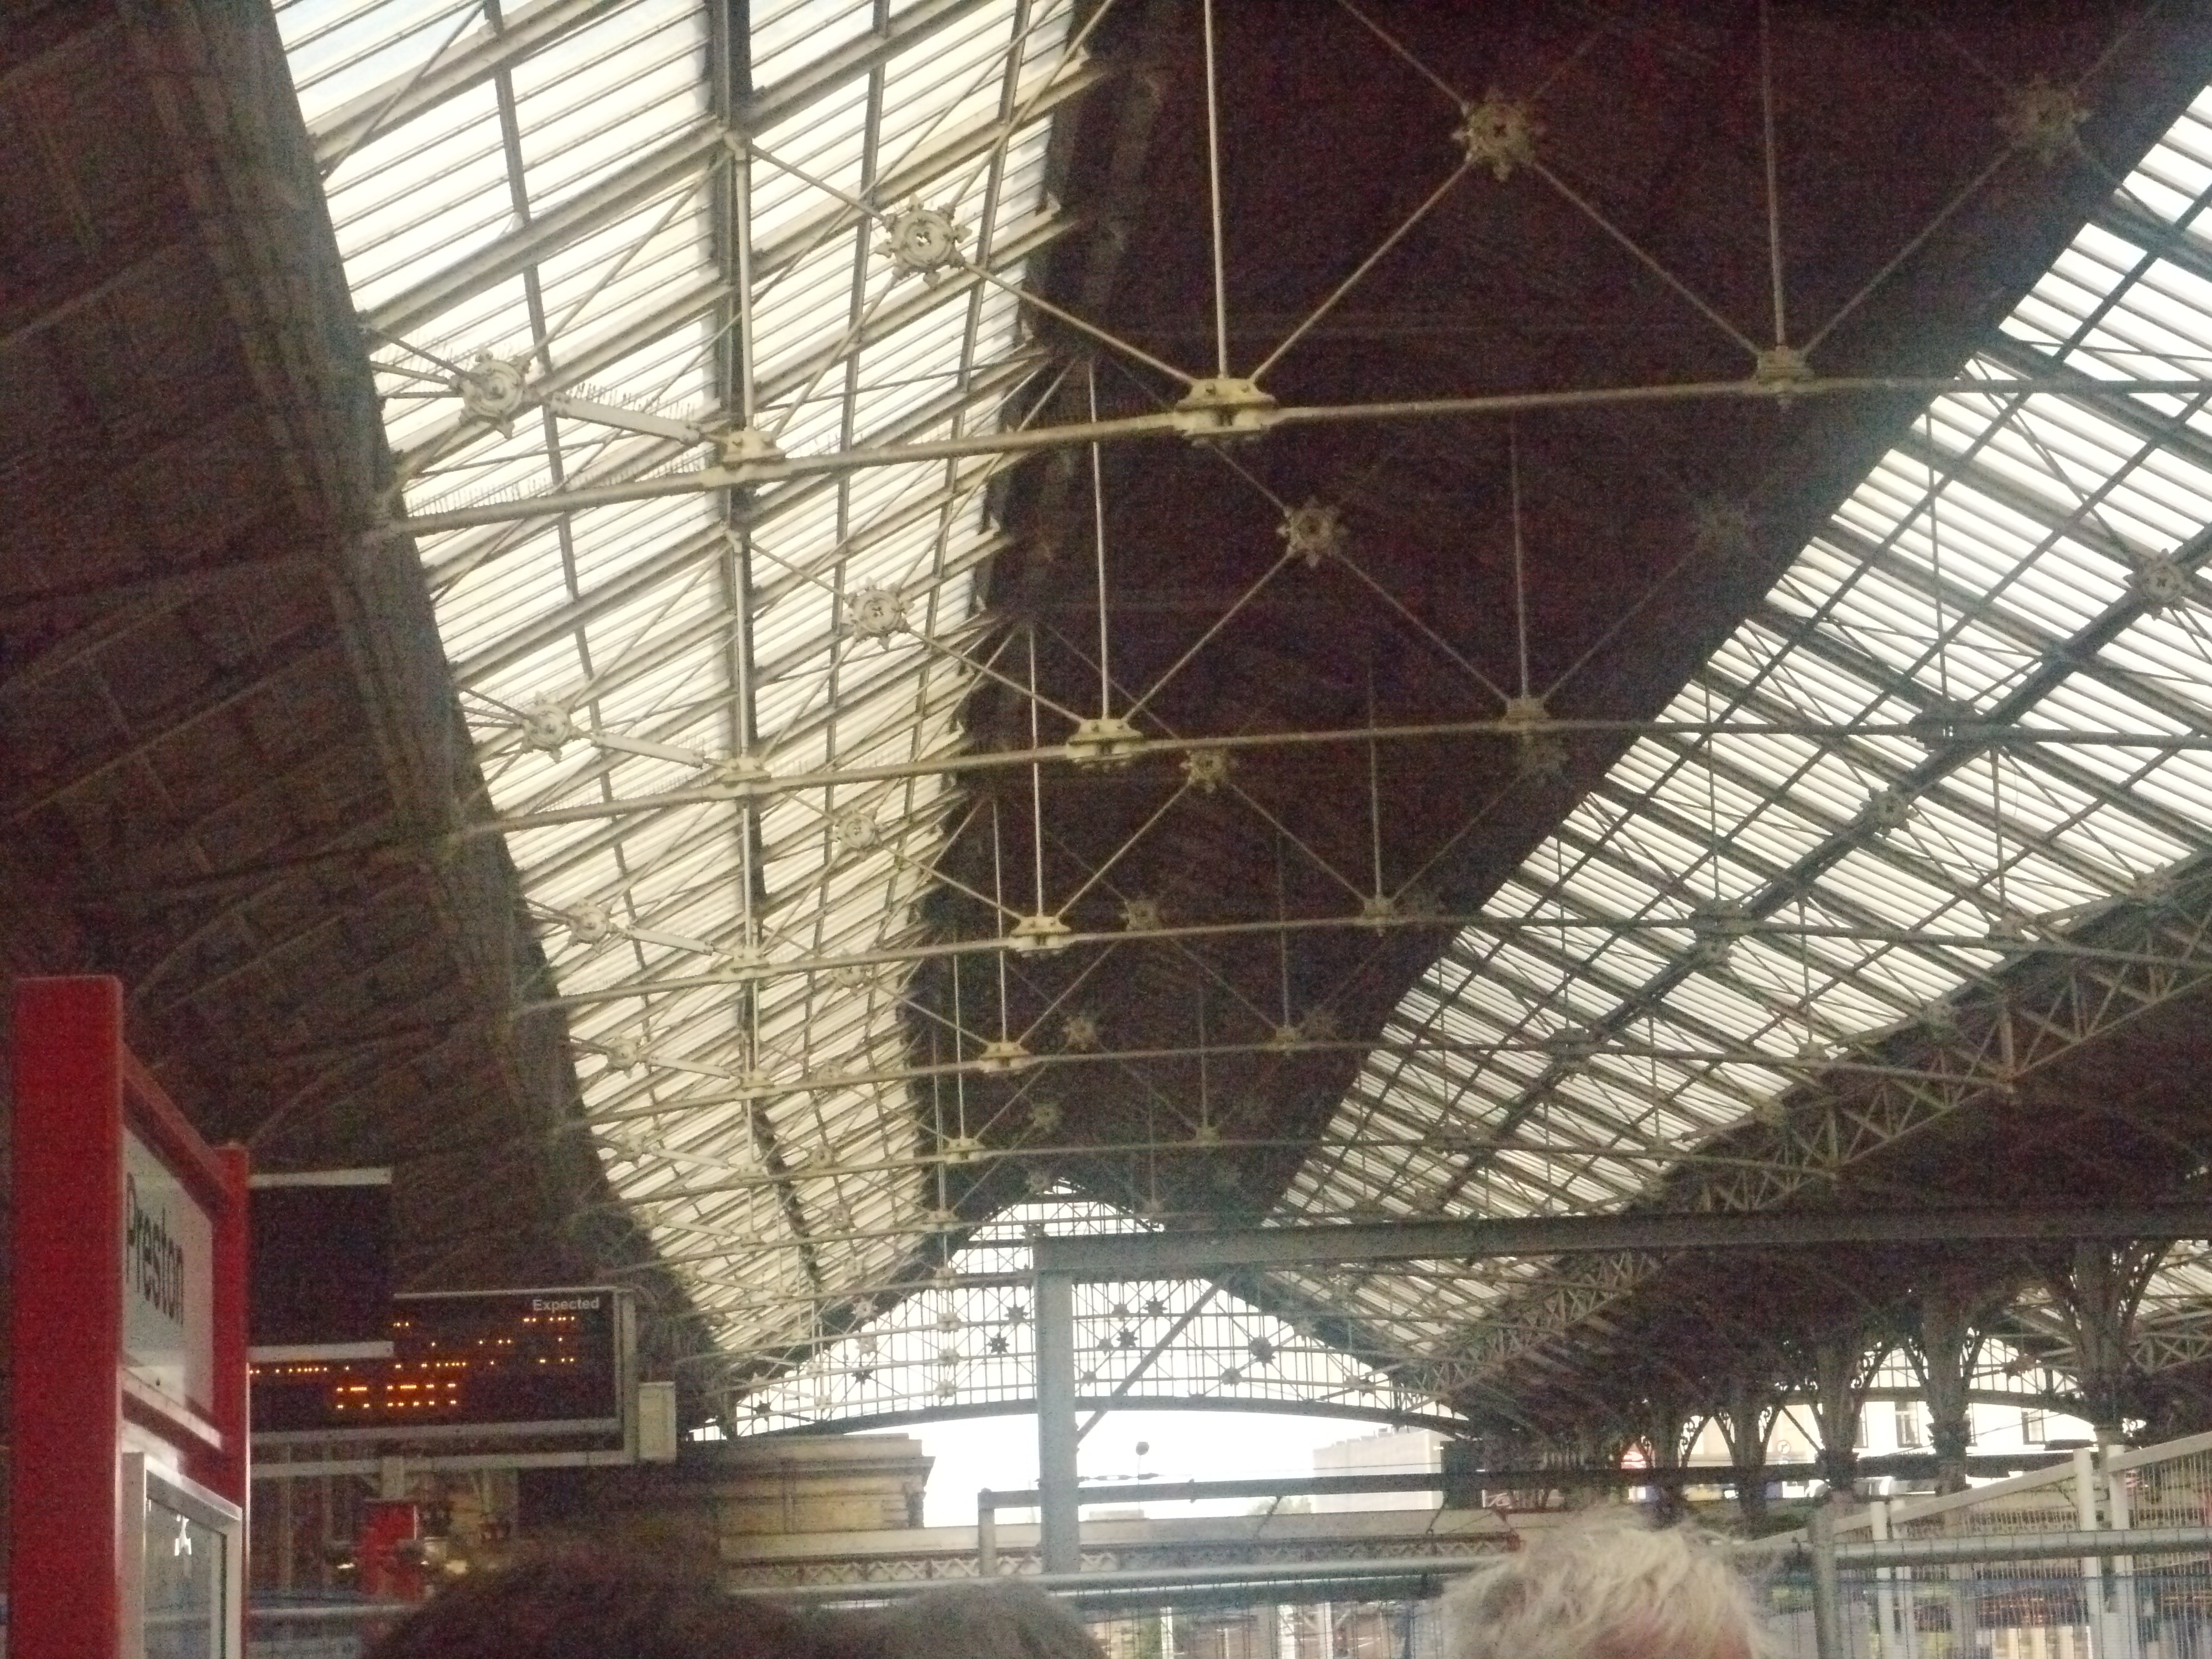 photo taken by me - Preston railway station - where lots of luggage would go 